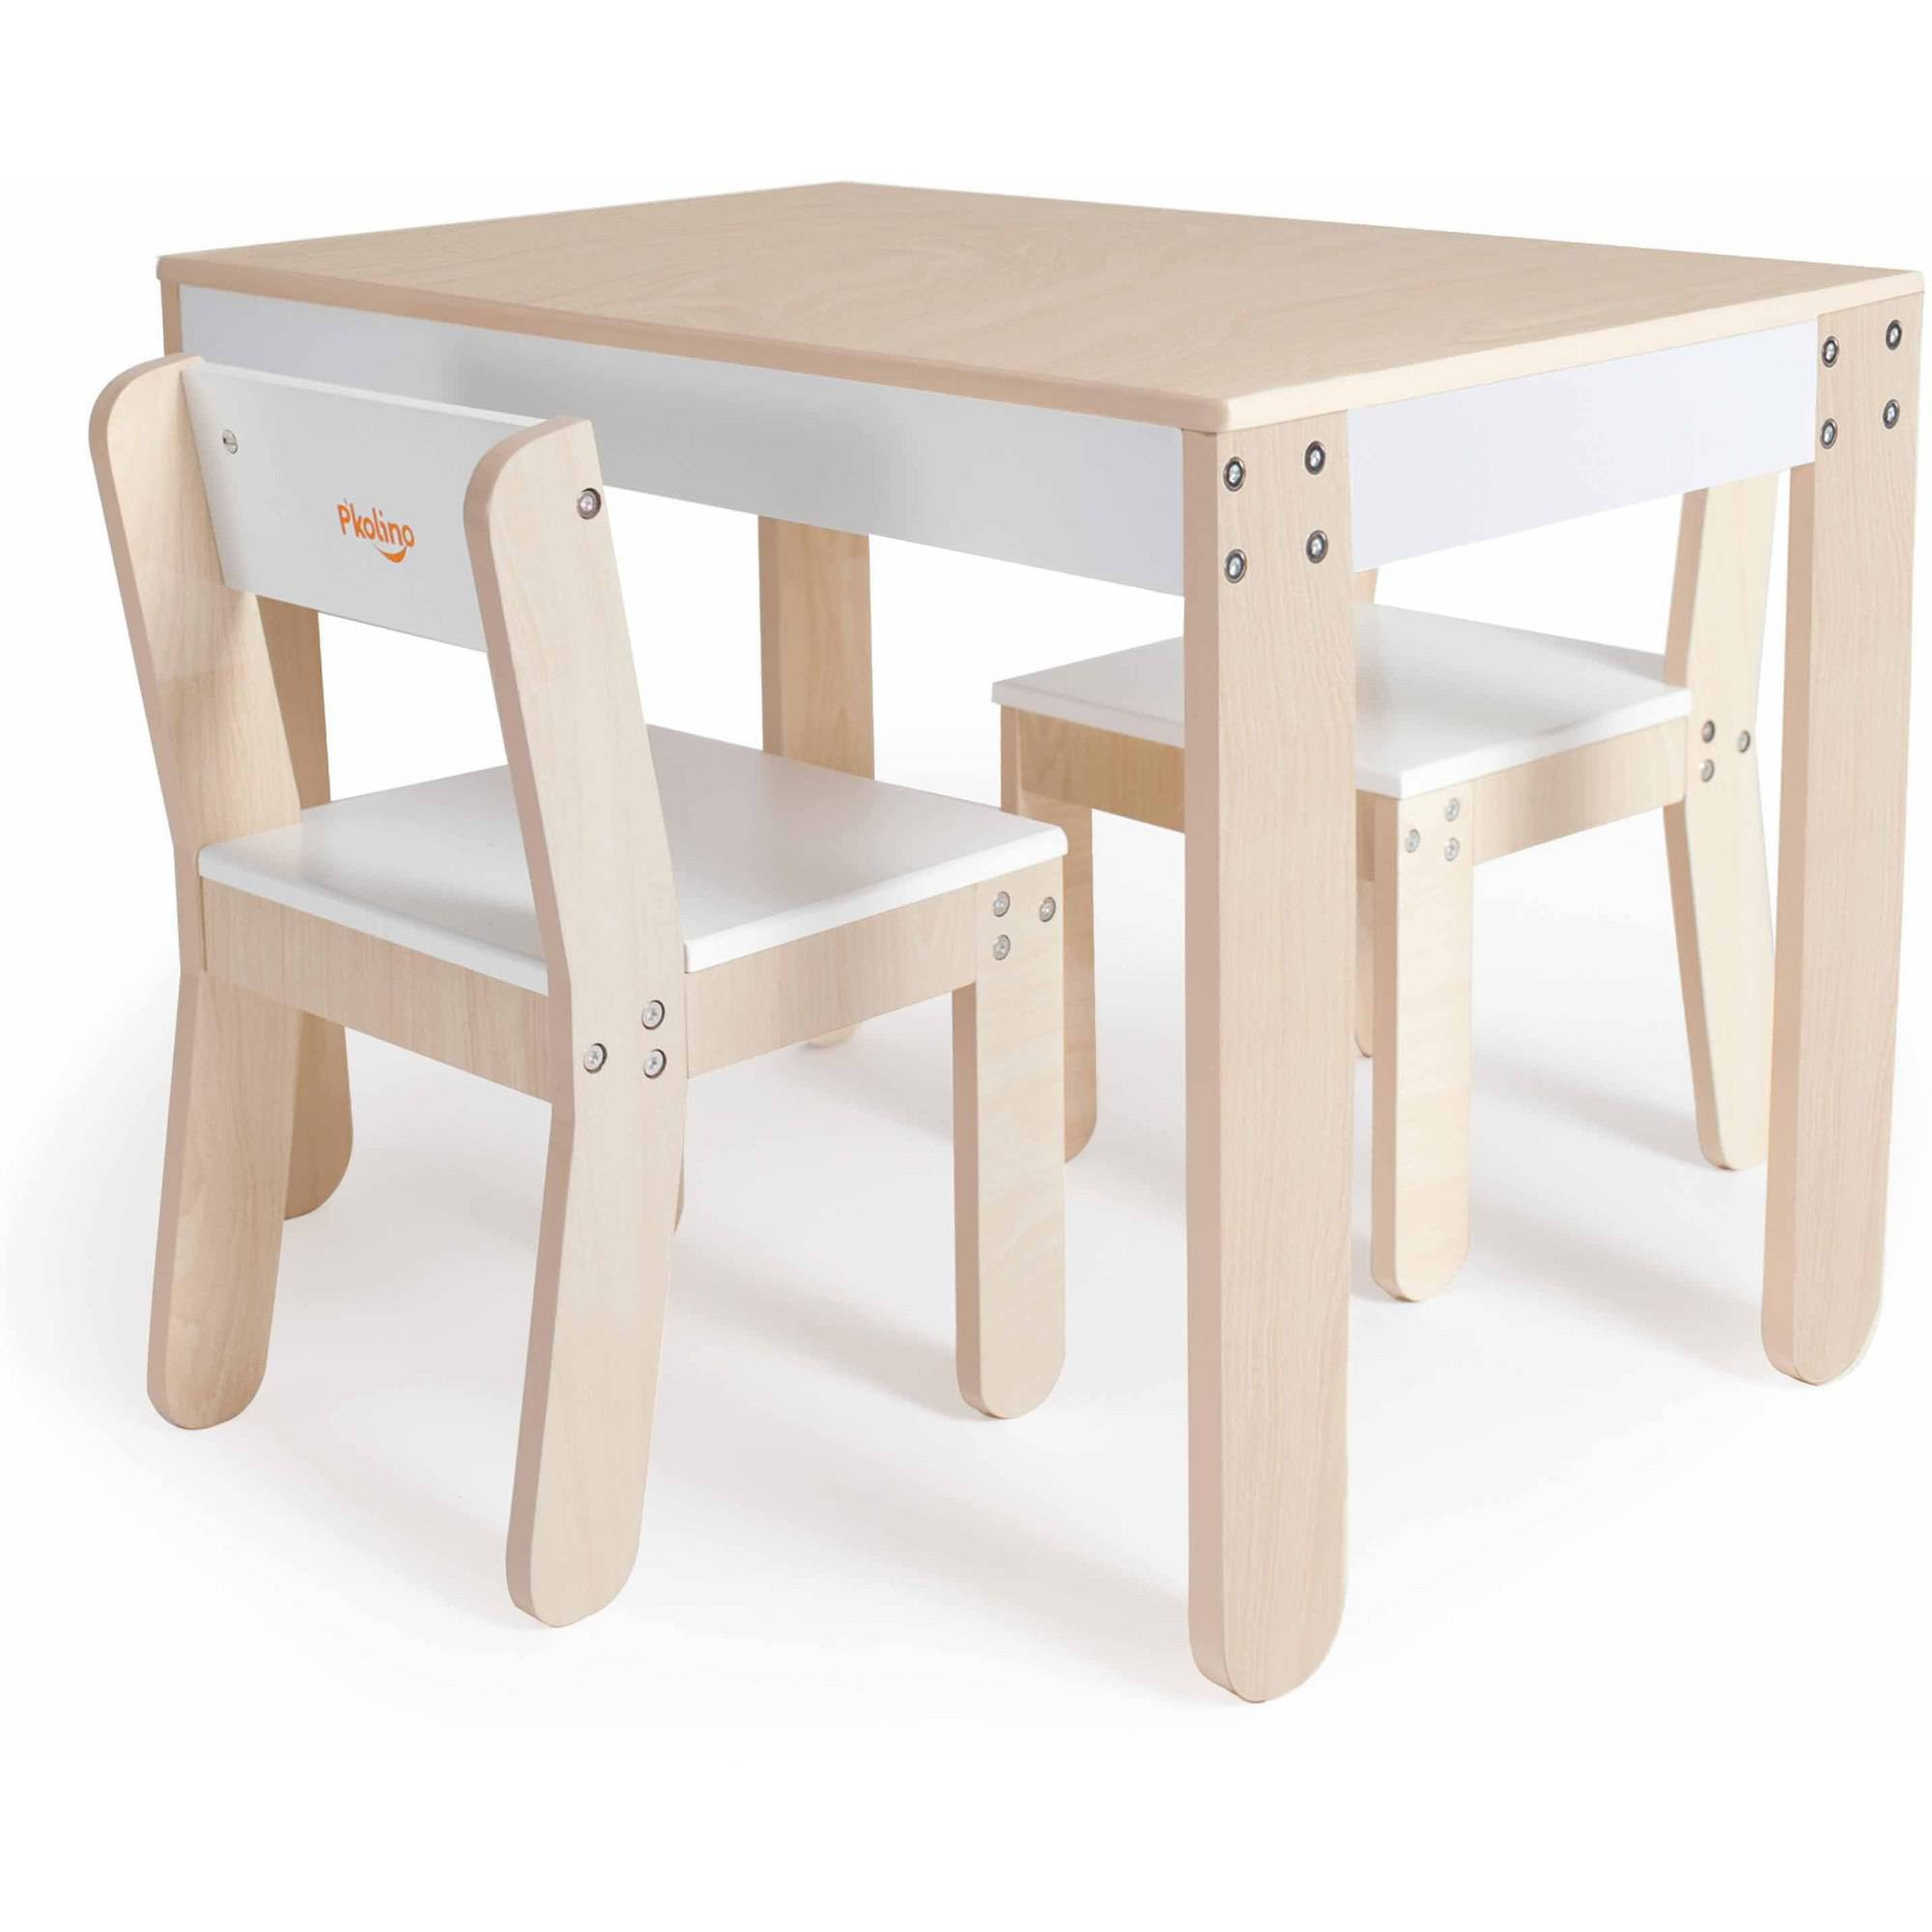 Little Kids Table And Chairs
 P kolino Little e s Kids Table and Chairs Multiple